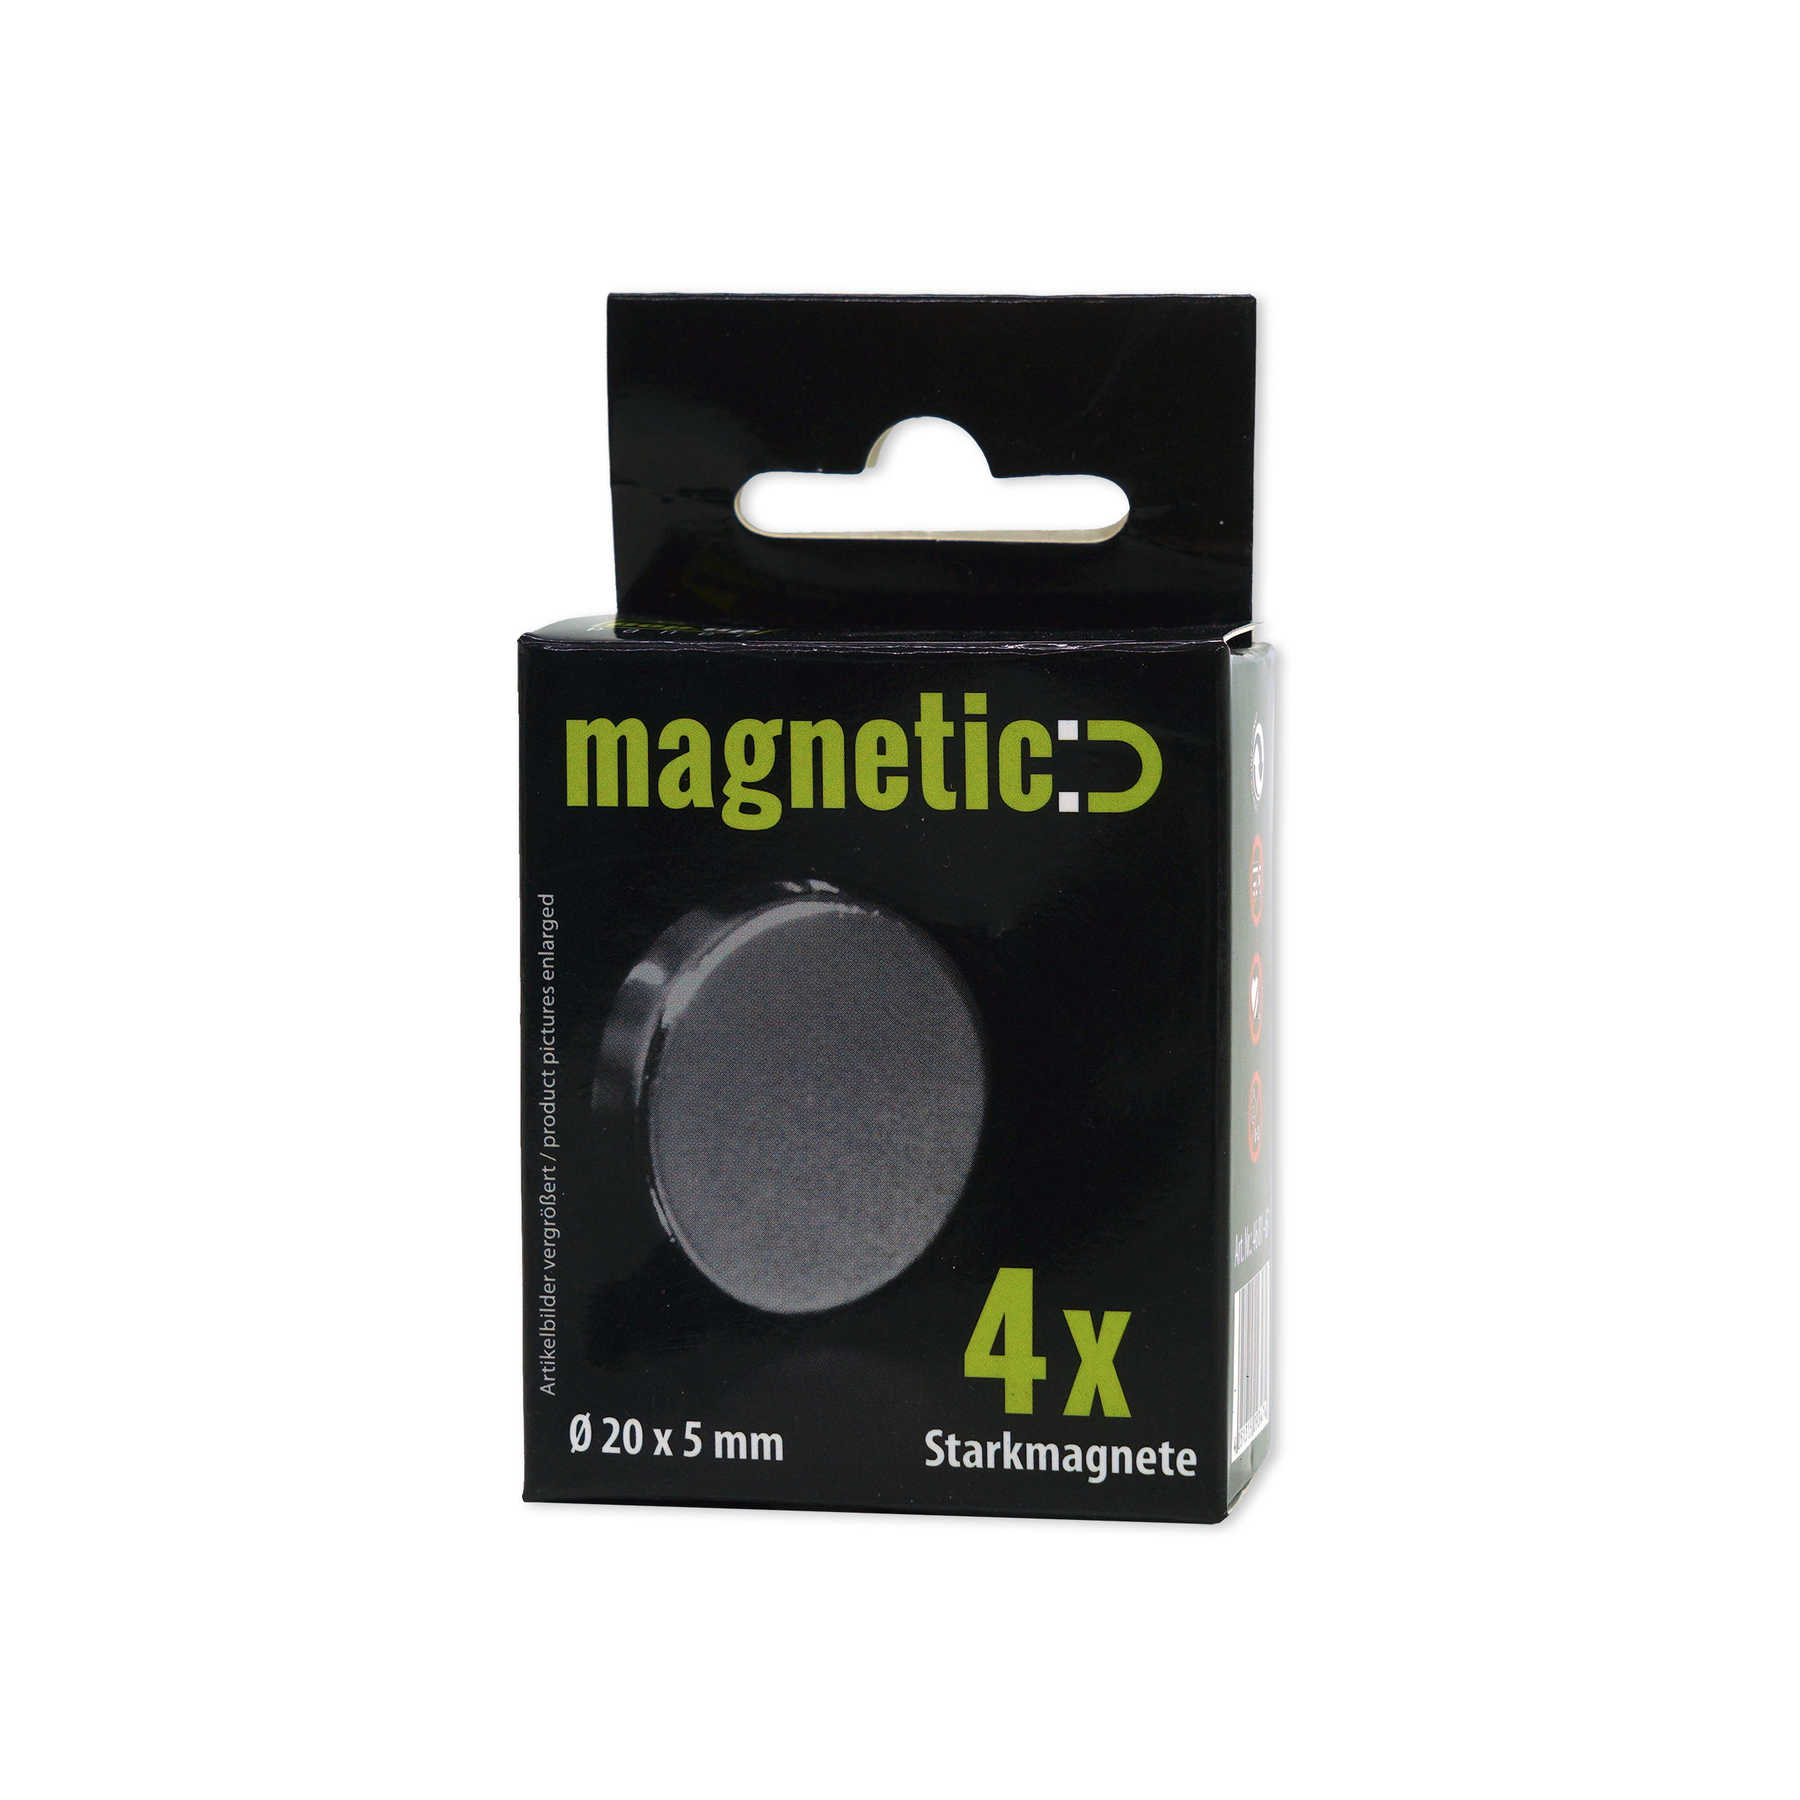             Set of 4 round strong magnets in 20 x 5 mm
        